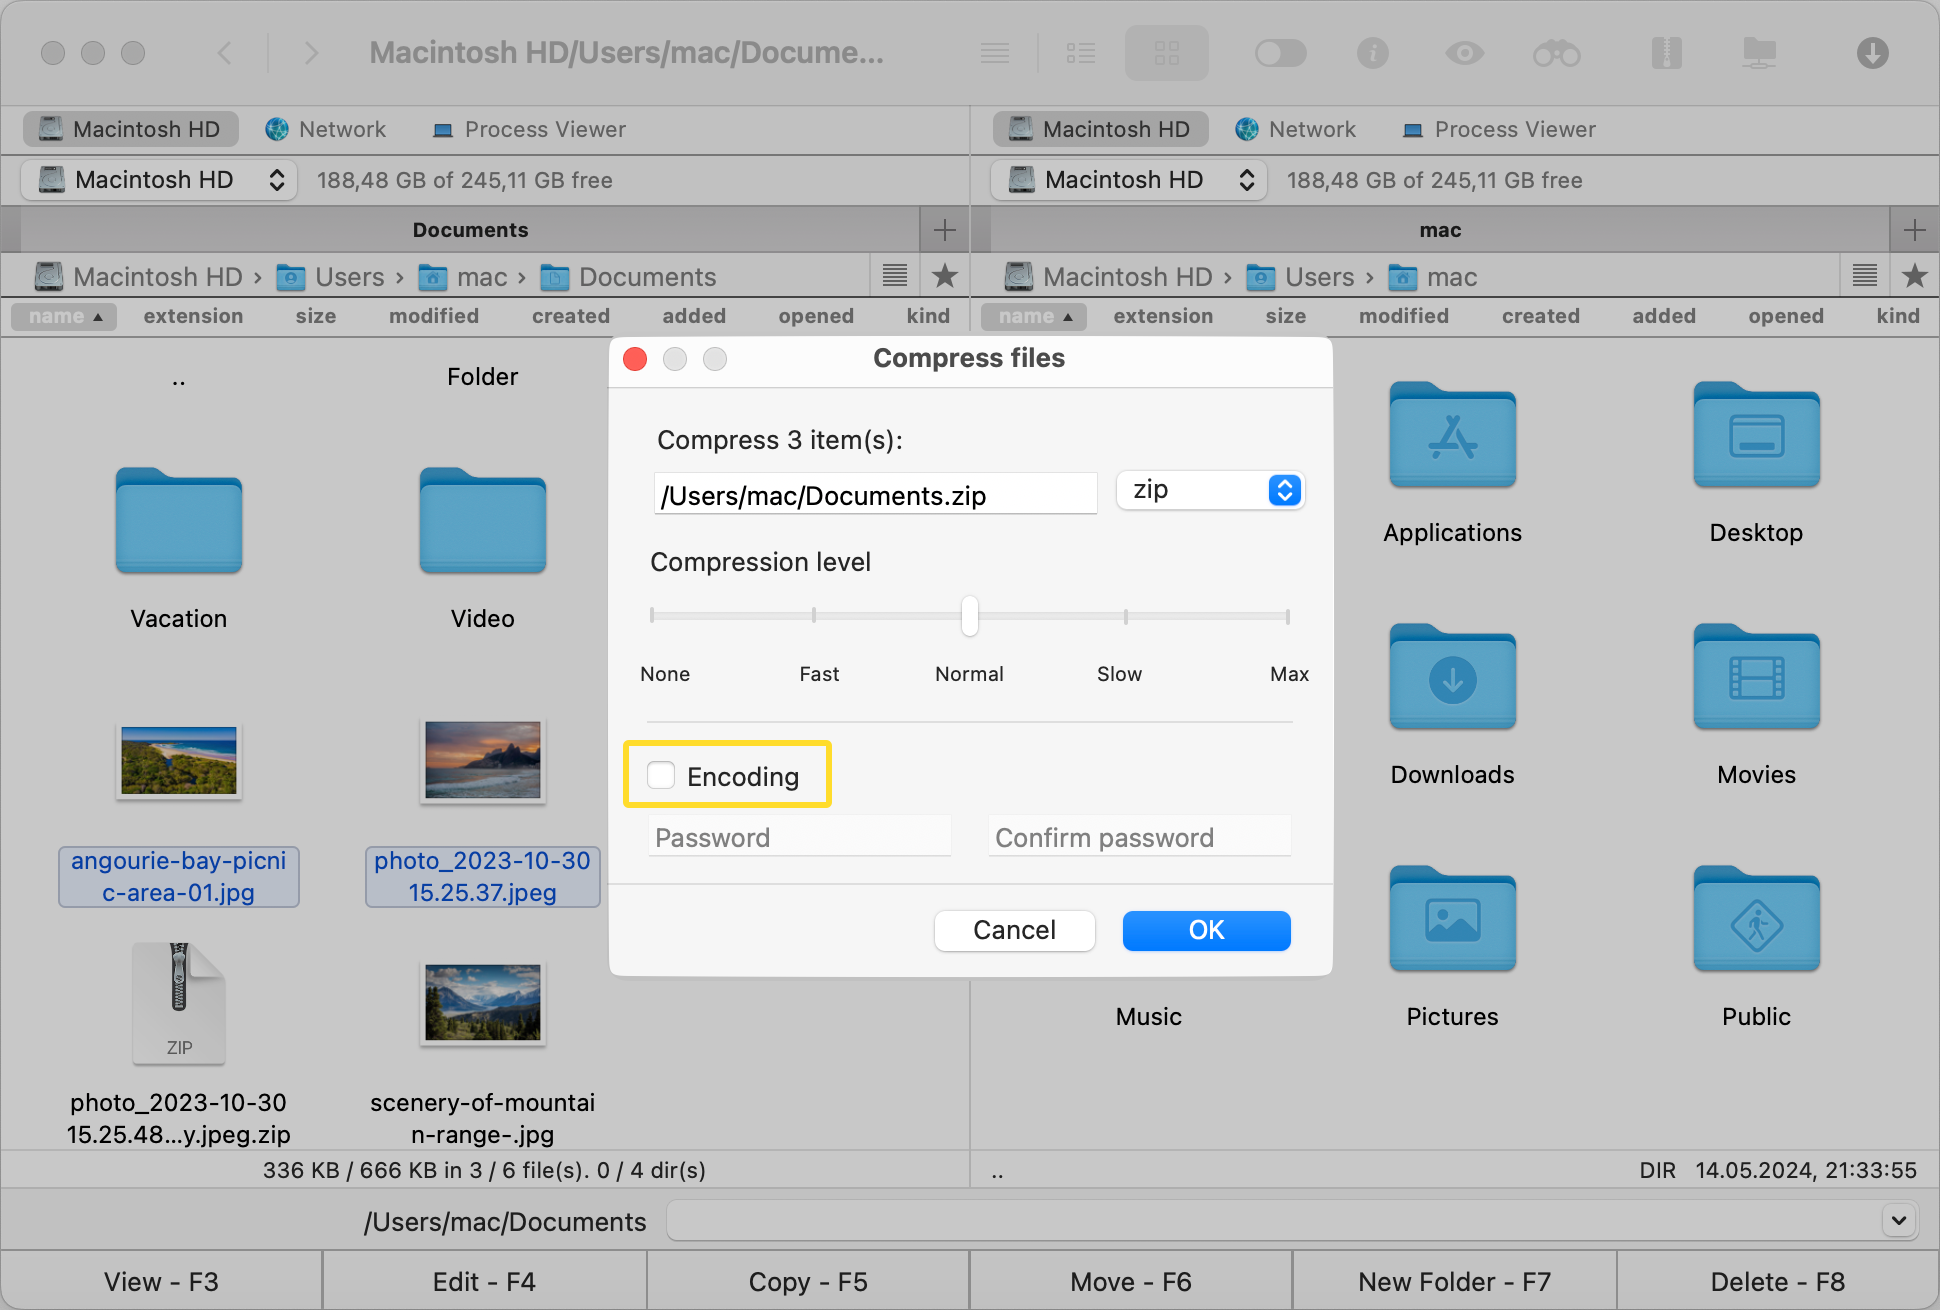 The Encoding feature of the Compress files pop-up menu is highlighted